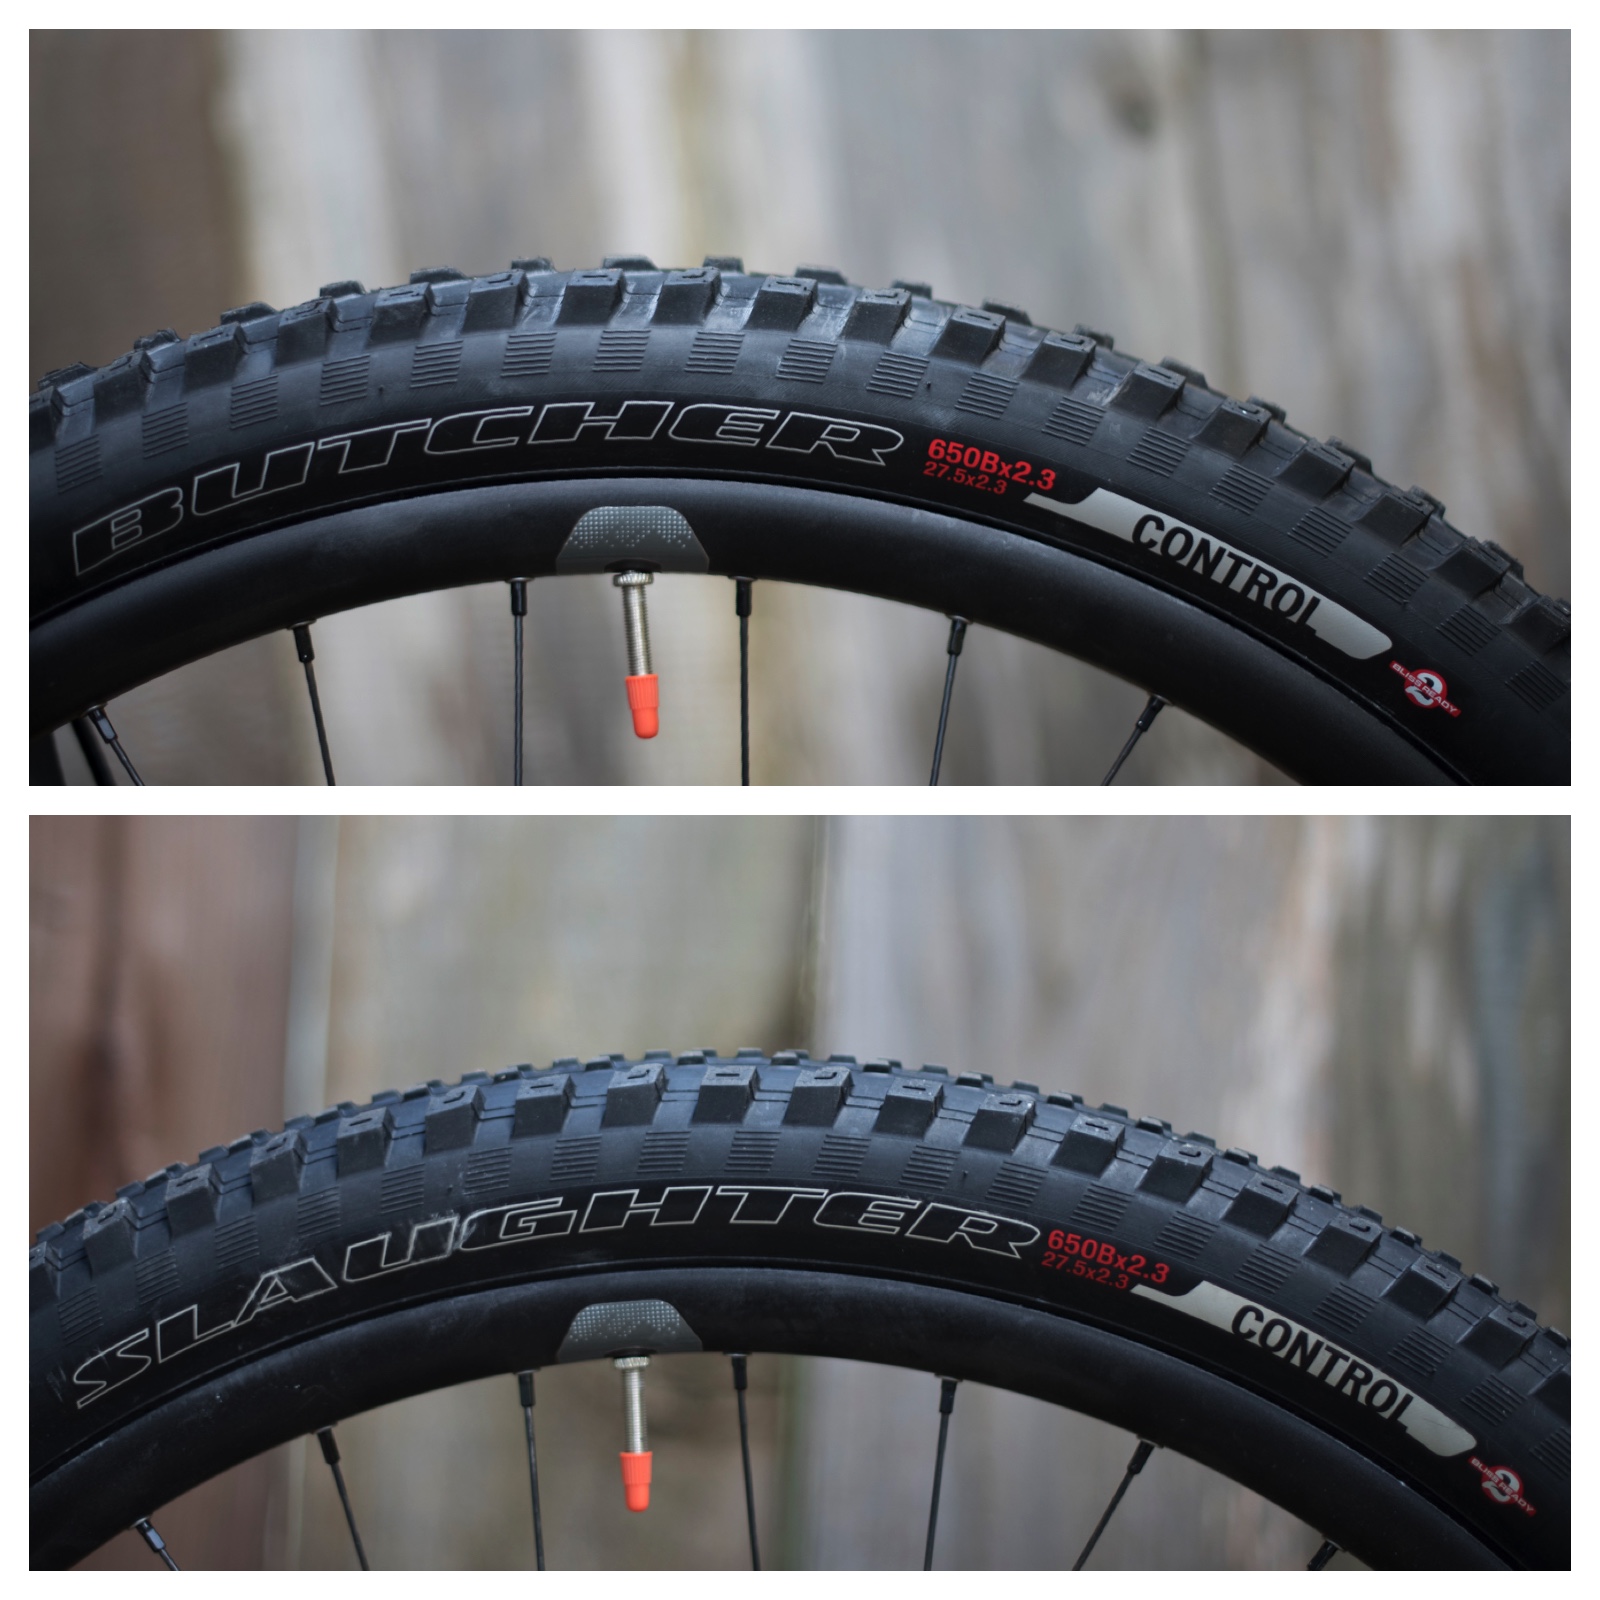 specialized control tires